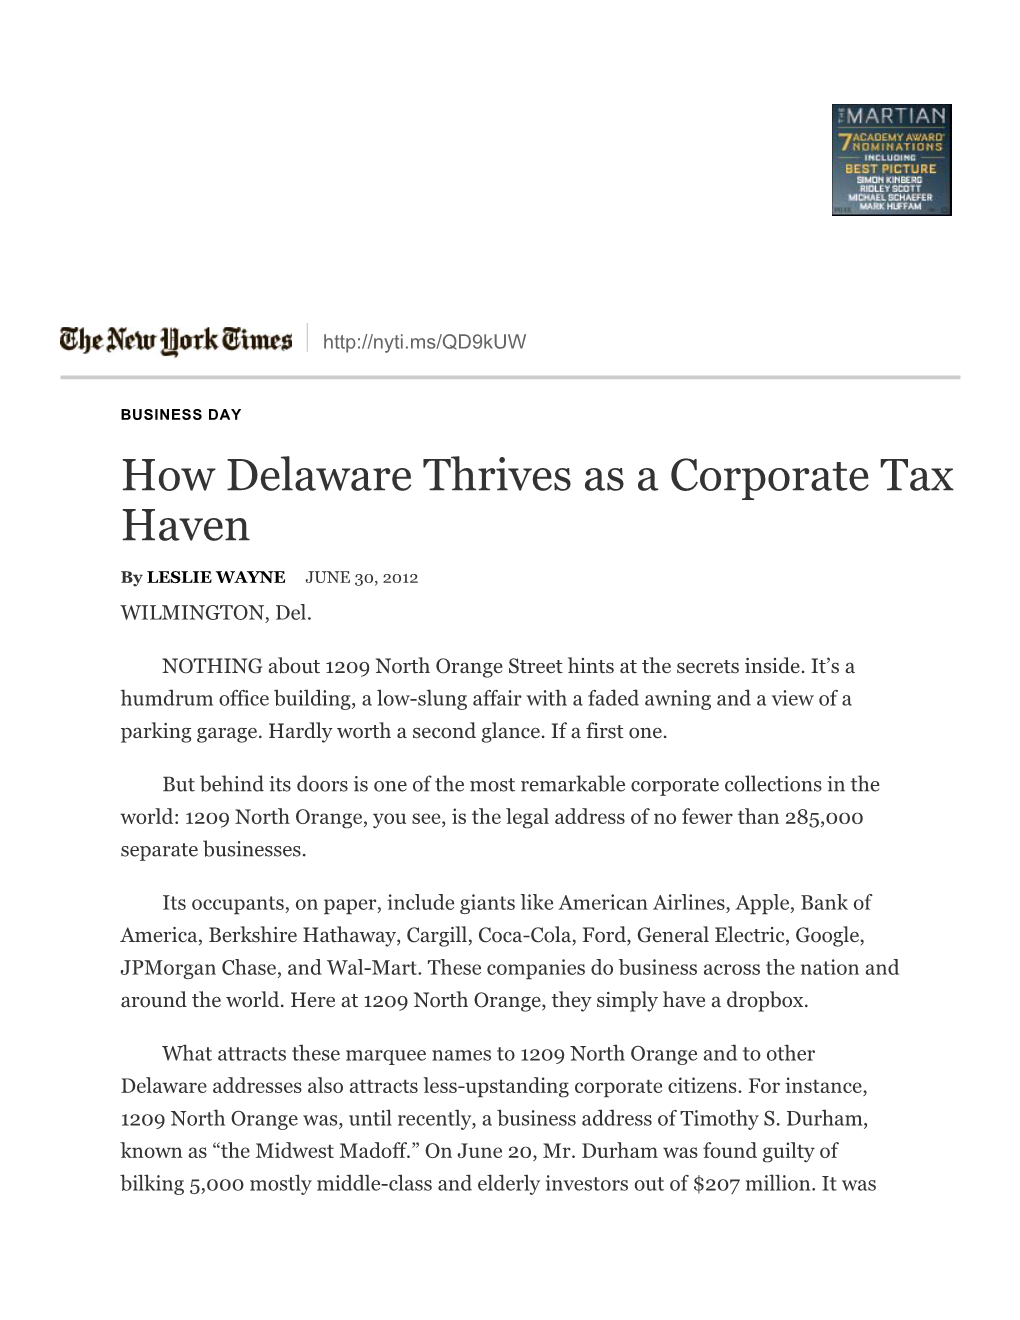 How Delaware Thrives As a Corporate Tax Haven